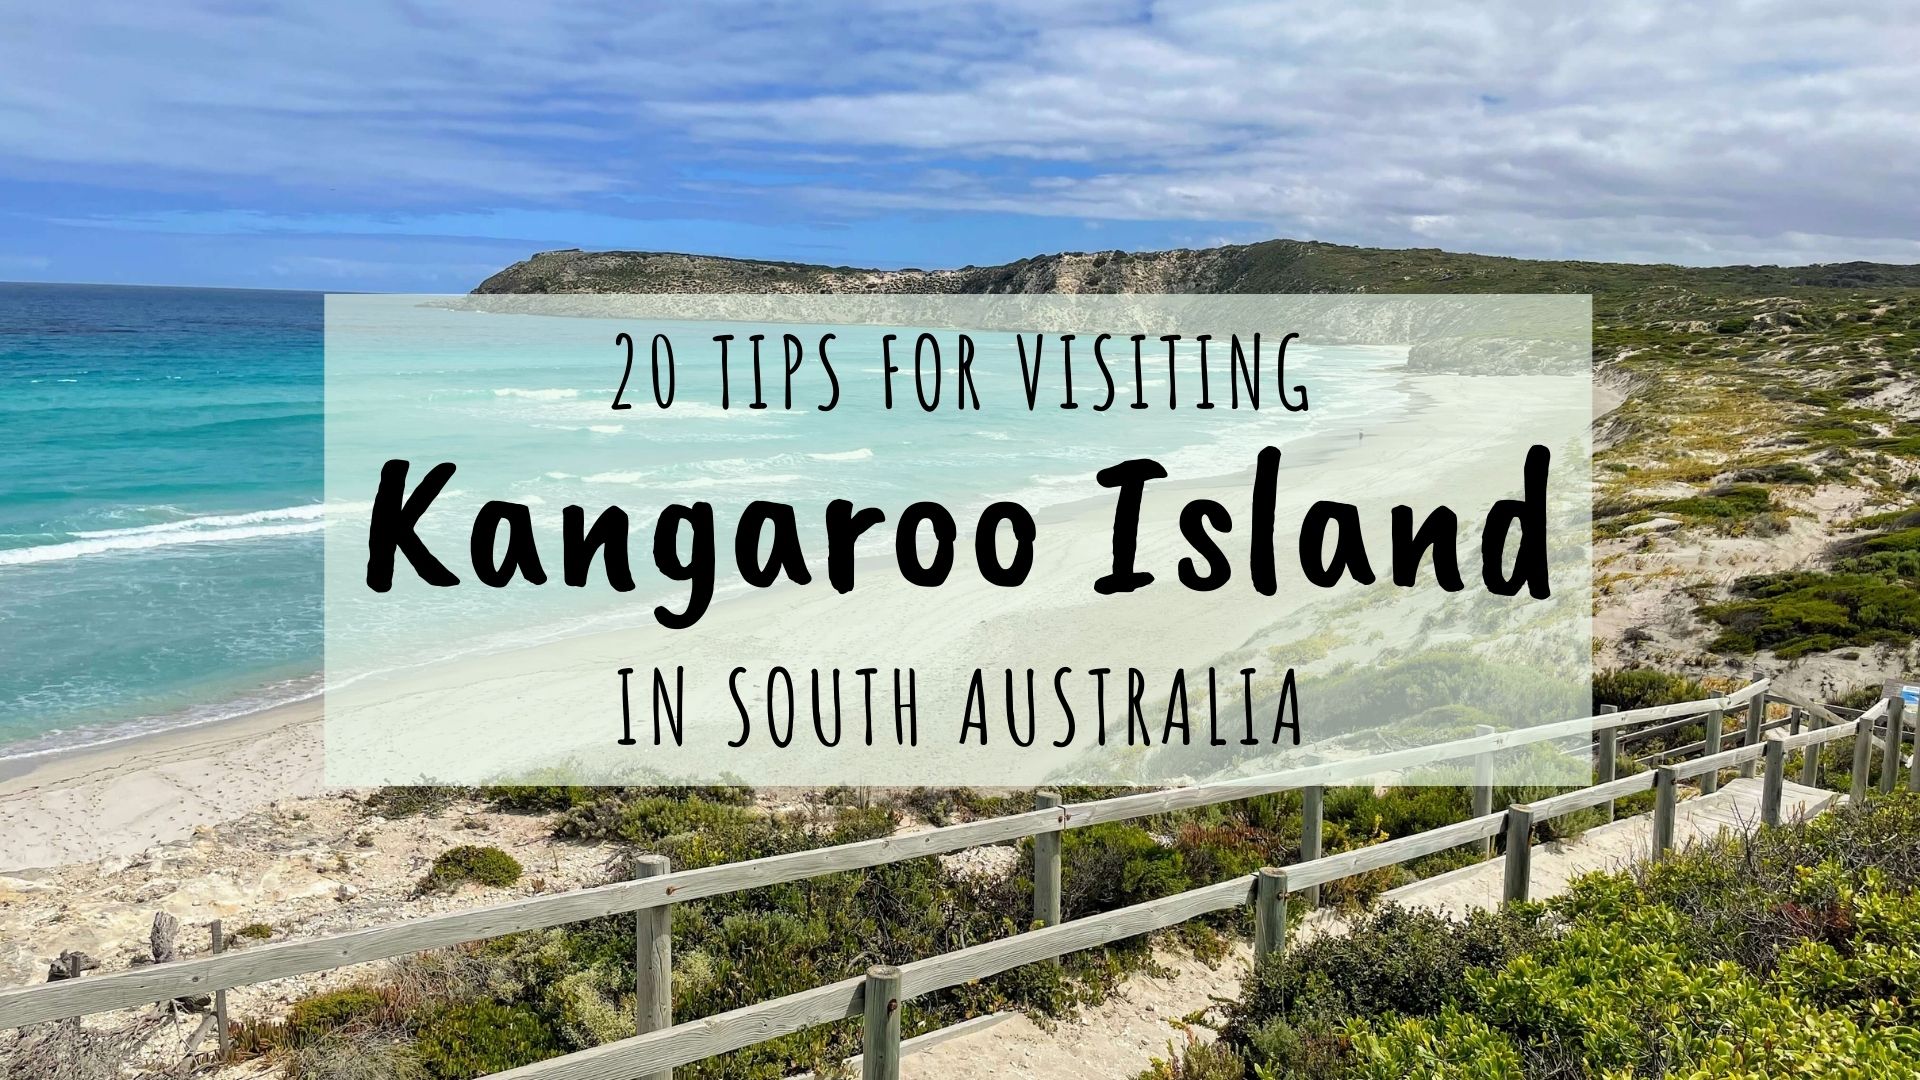 Top tips for visiting Kangaroo Island, must read tips for visiting Kangaroo Island, Kangaroo Island travel tips, Tips for Kangaroo Island, South Australia, Australia travel tips, Kangaroo Island tips for visiting